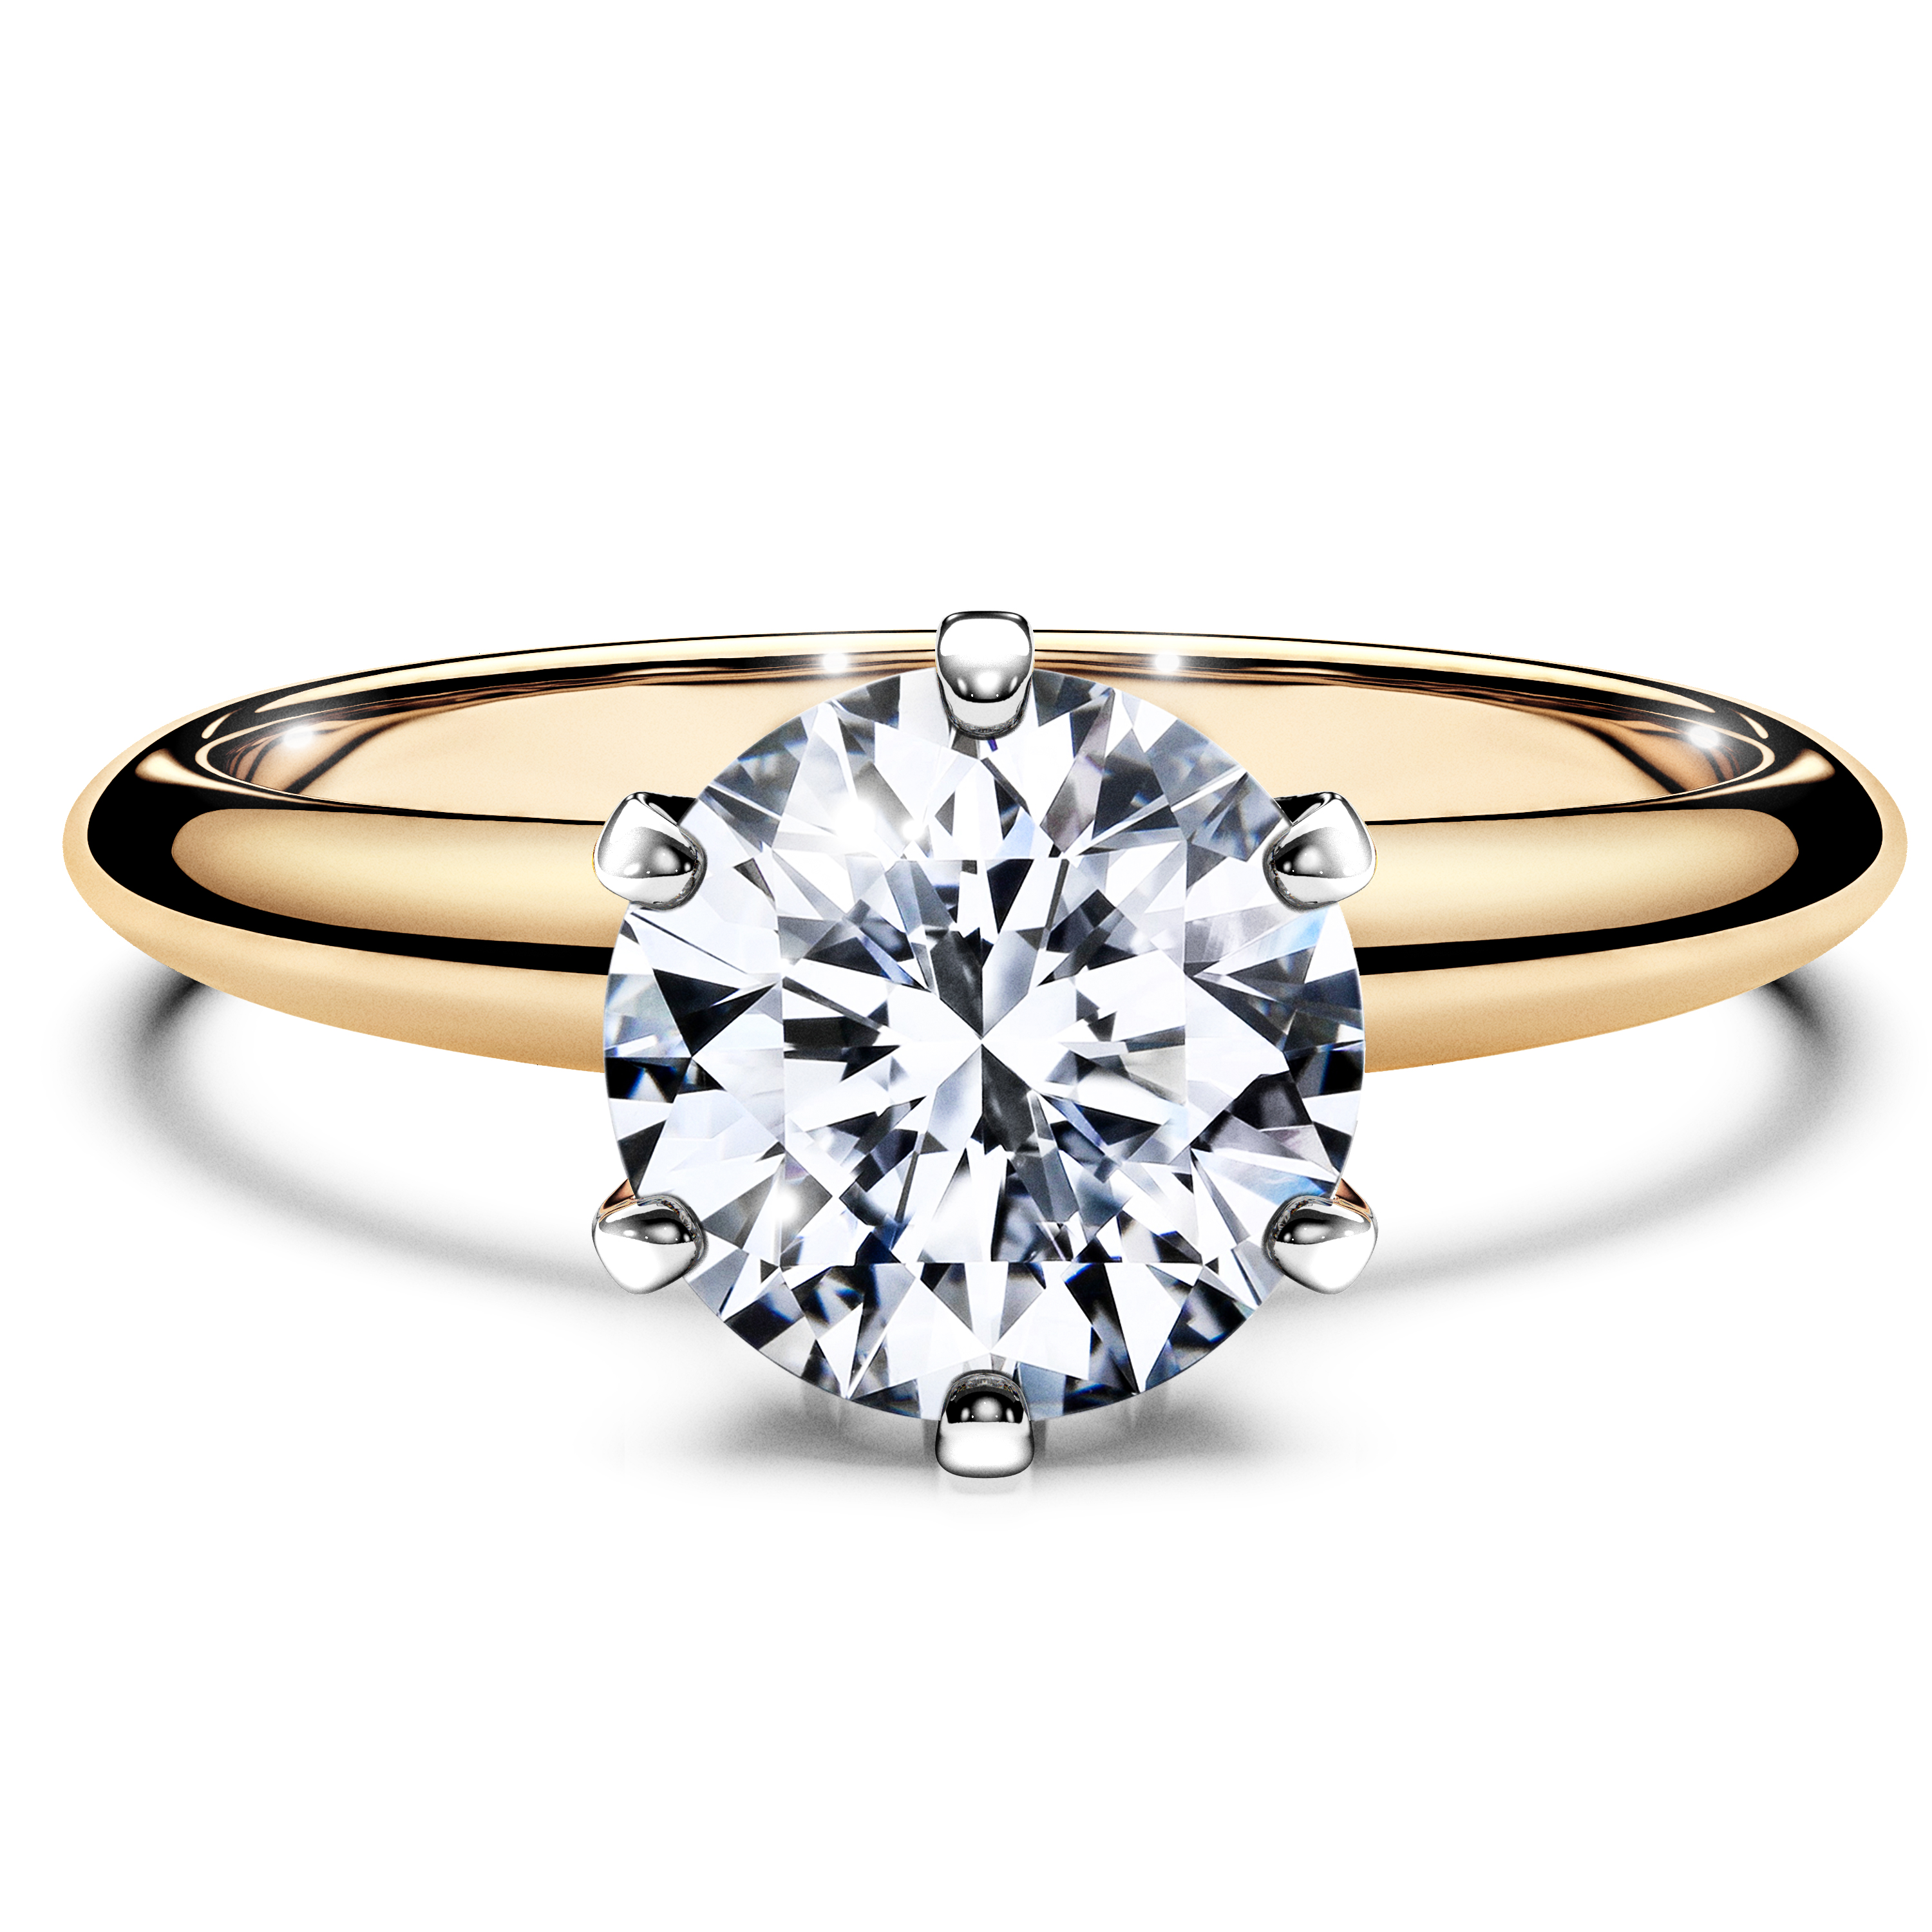 6 Carat Cushion Cut Diamond Rings | Find The Perfect Diamond For YOU